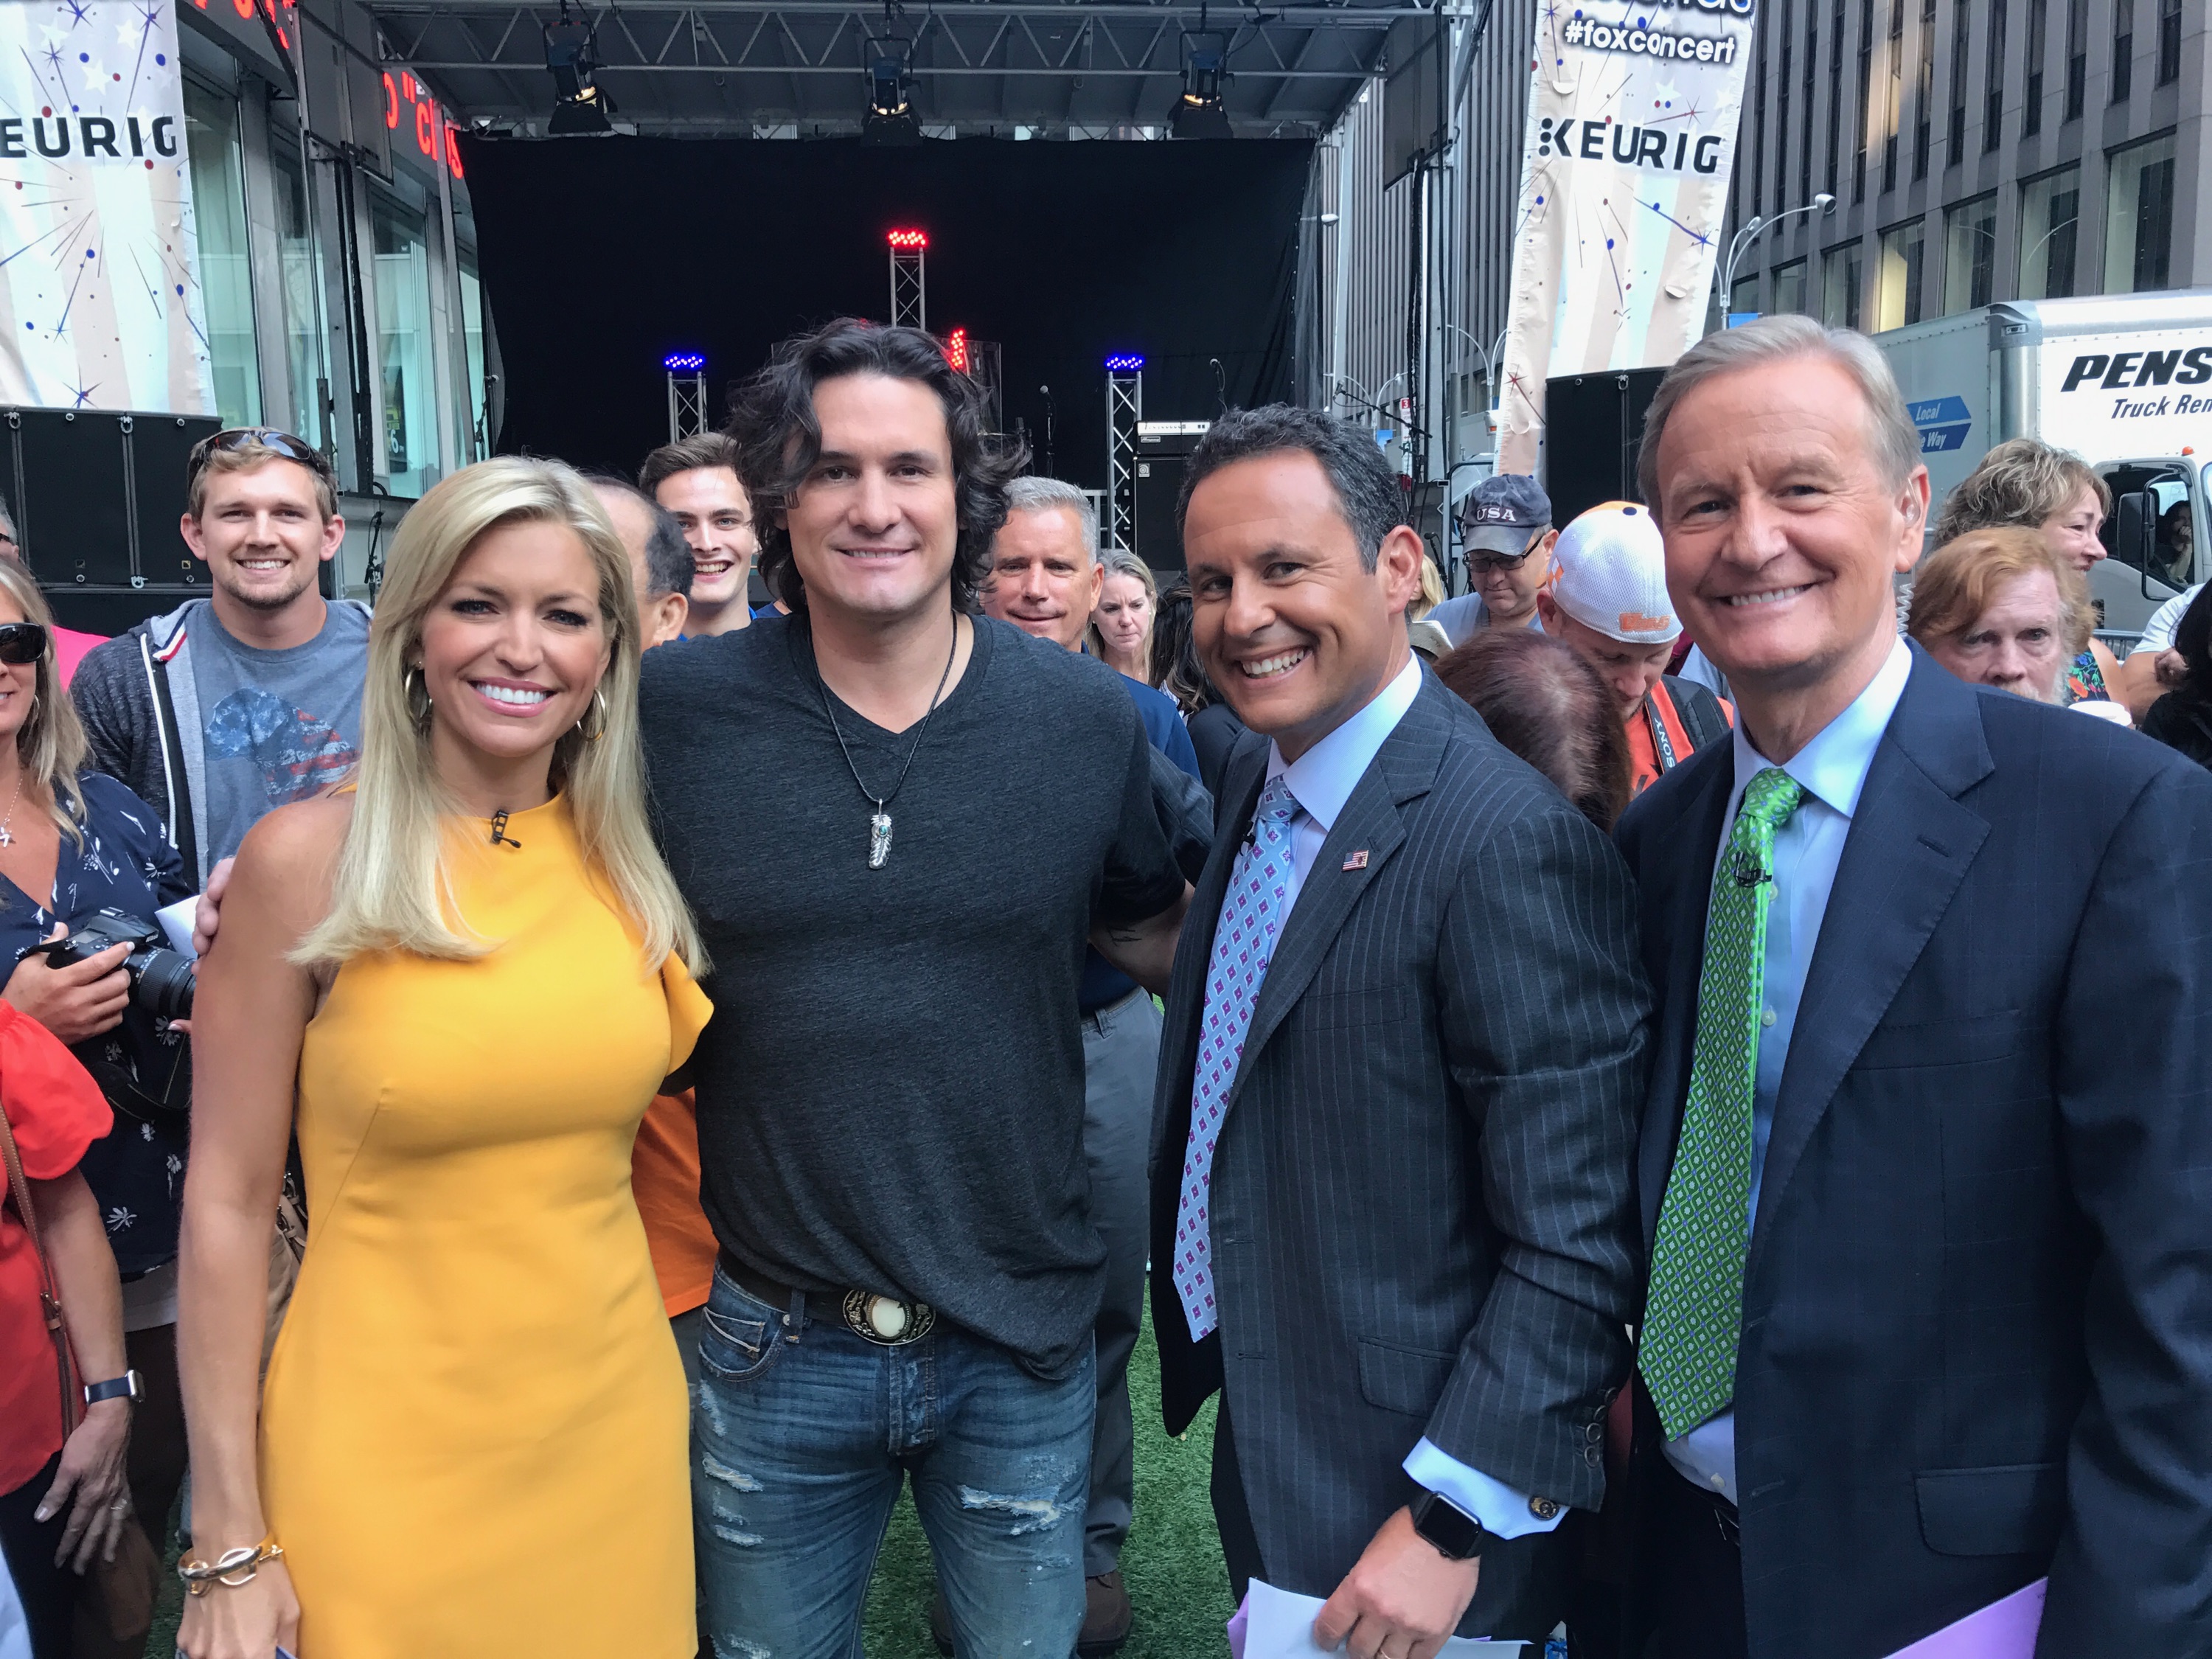 WATCH: Joe Nichols Performs “Never Gets Old” on Fox & Friends’ “All American Summer” Concert Series